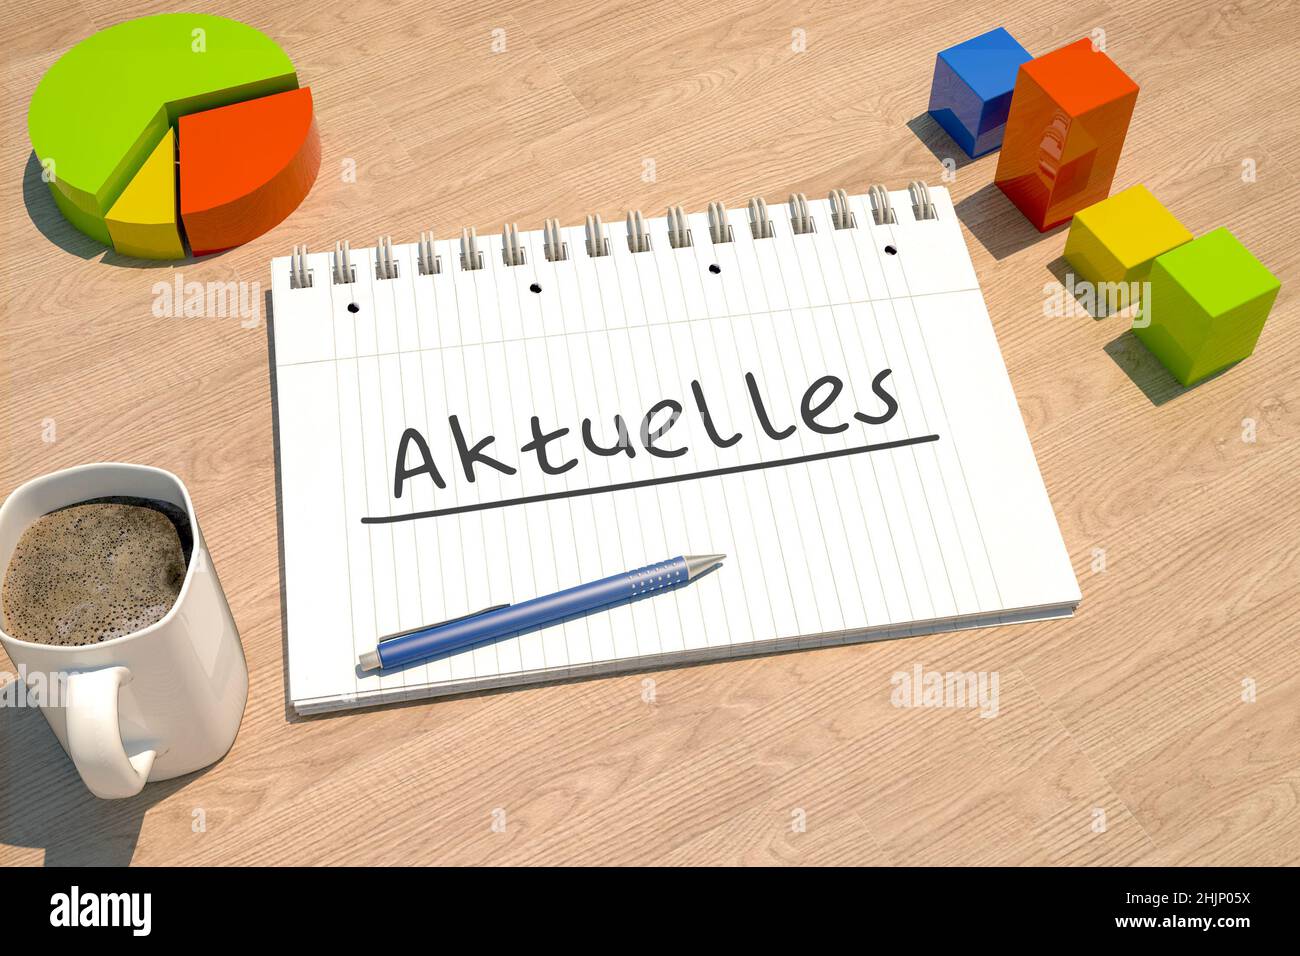 Aktuelles - german word for news, current, topically or updated  - text concept with notebook, coffee mug, bar graph and pie chart on wooden backgroun Stock Photo